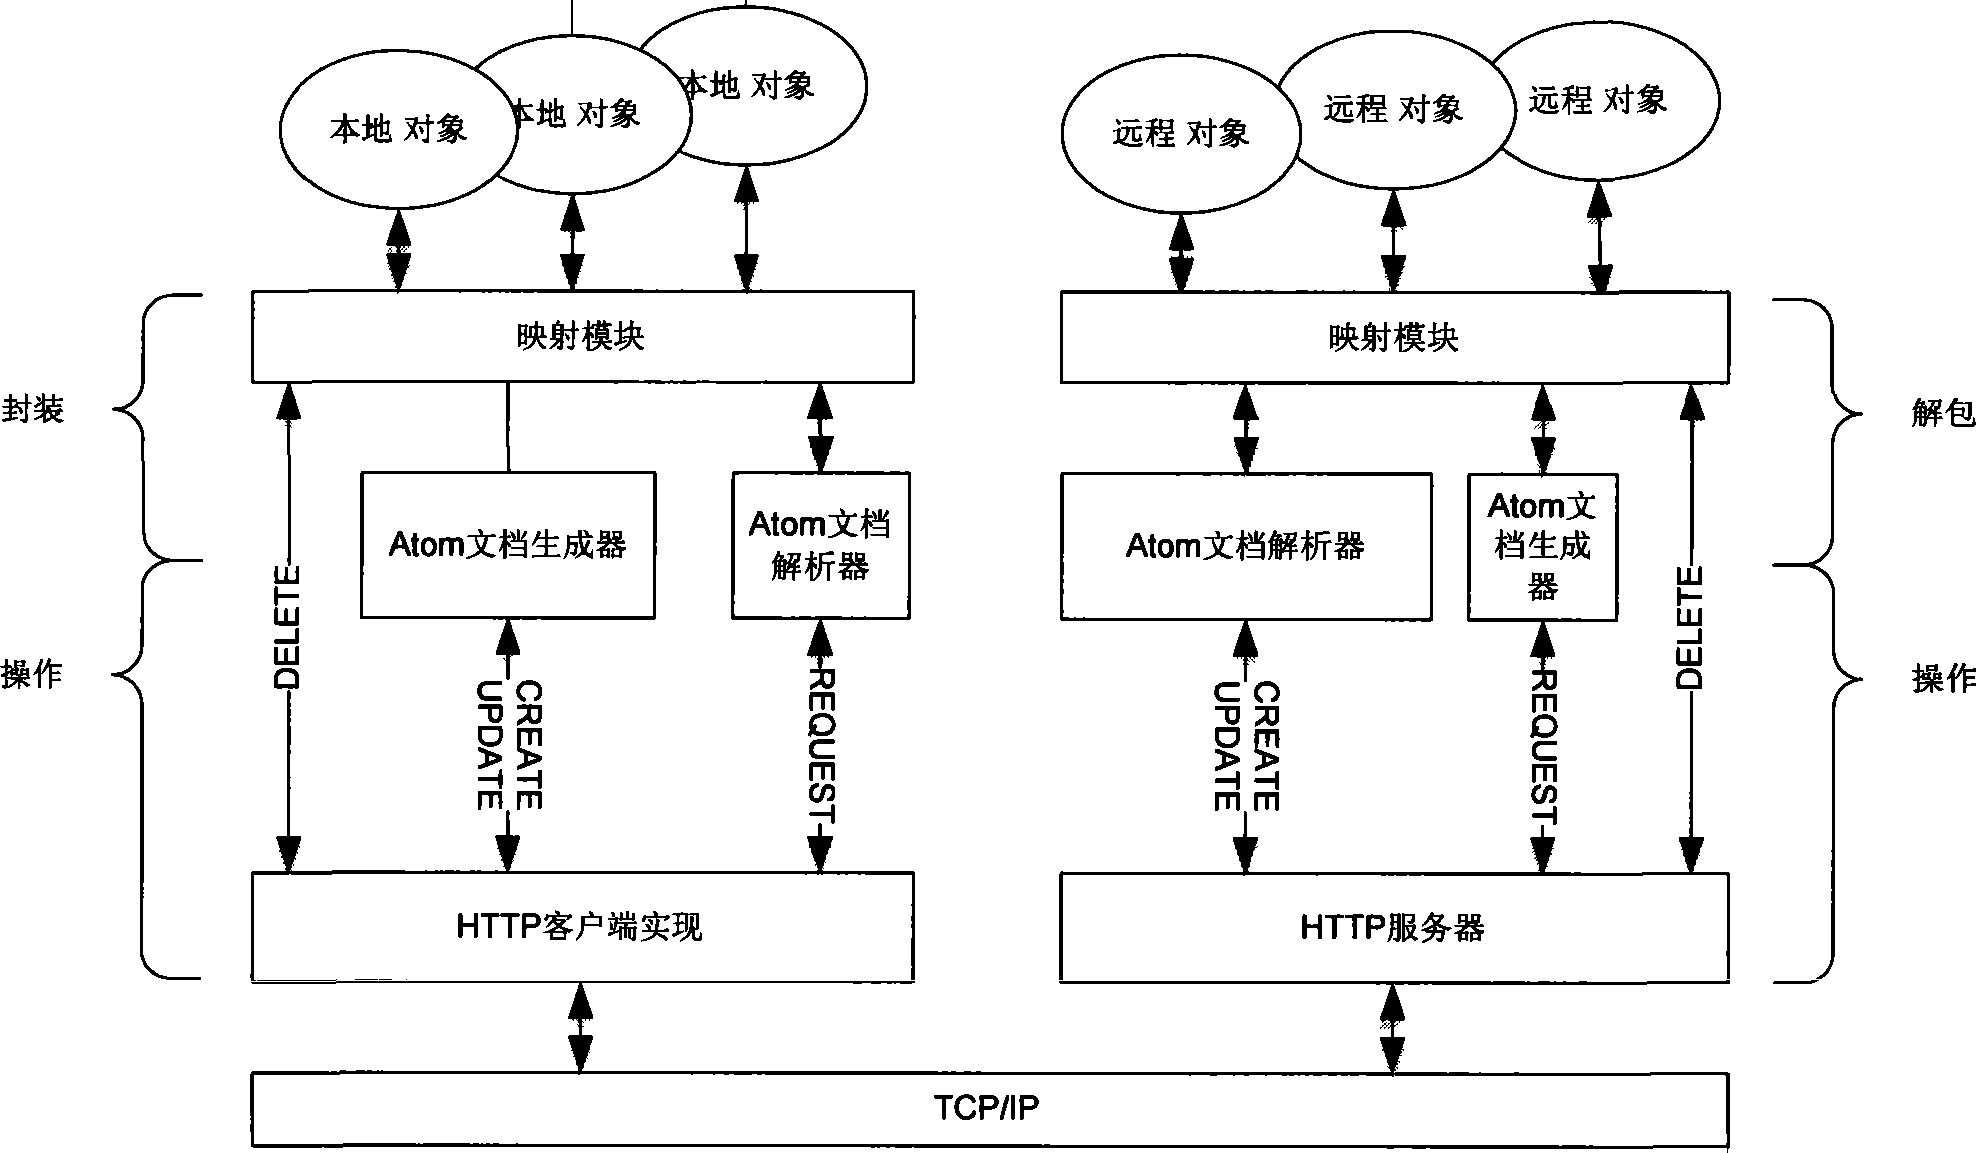 Remote object switching method based on ATOM protocol